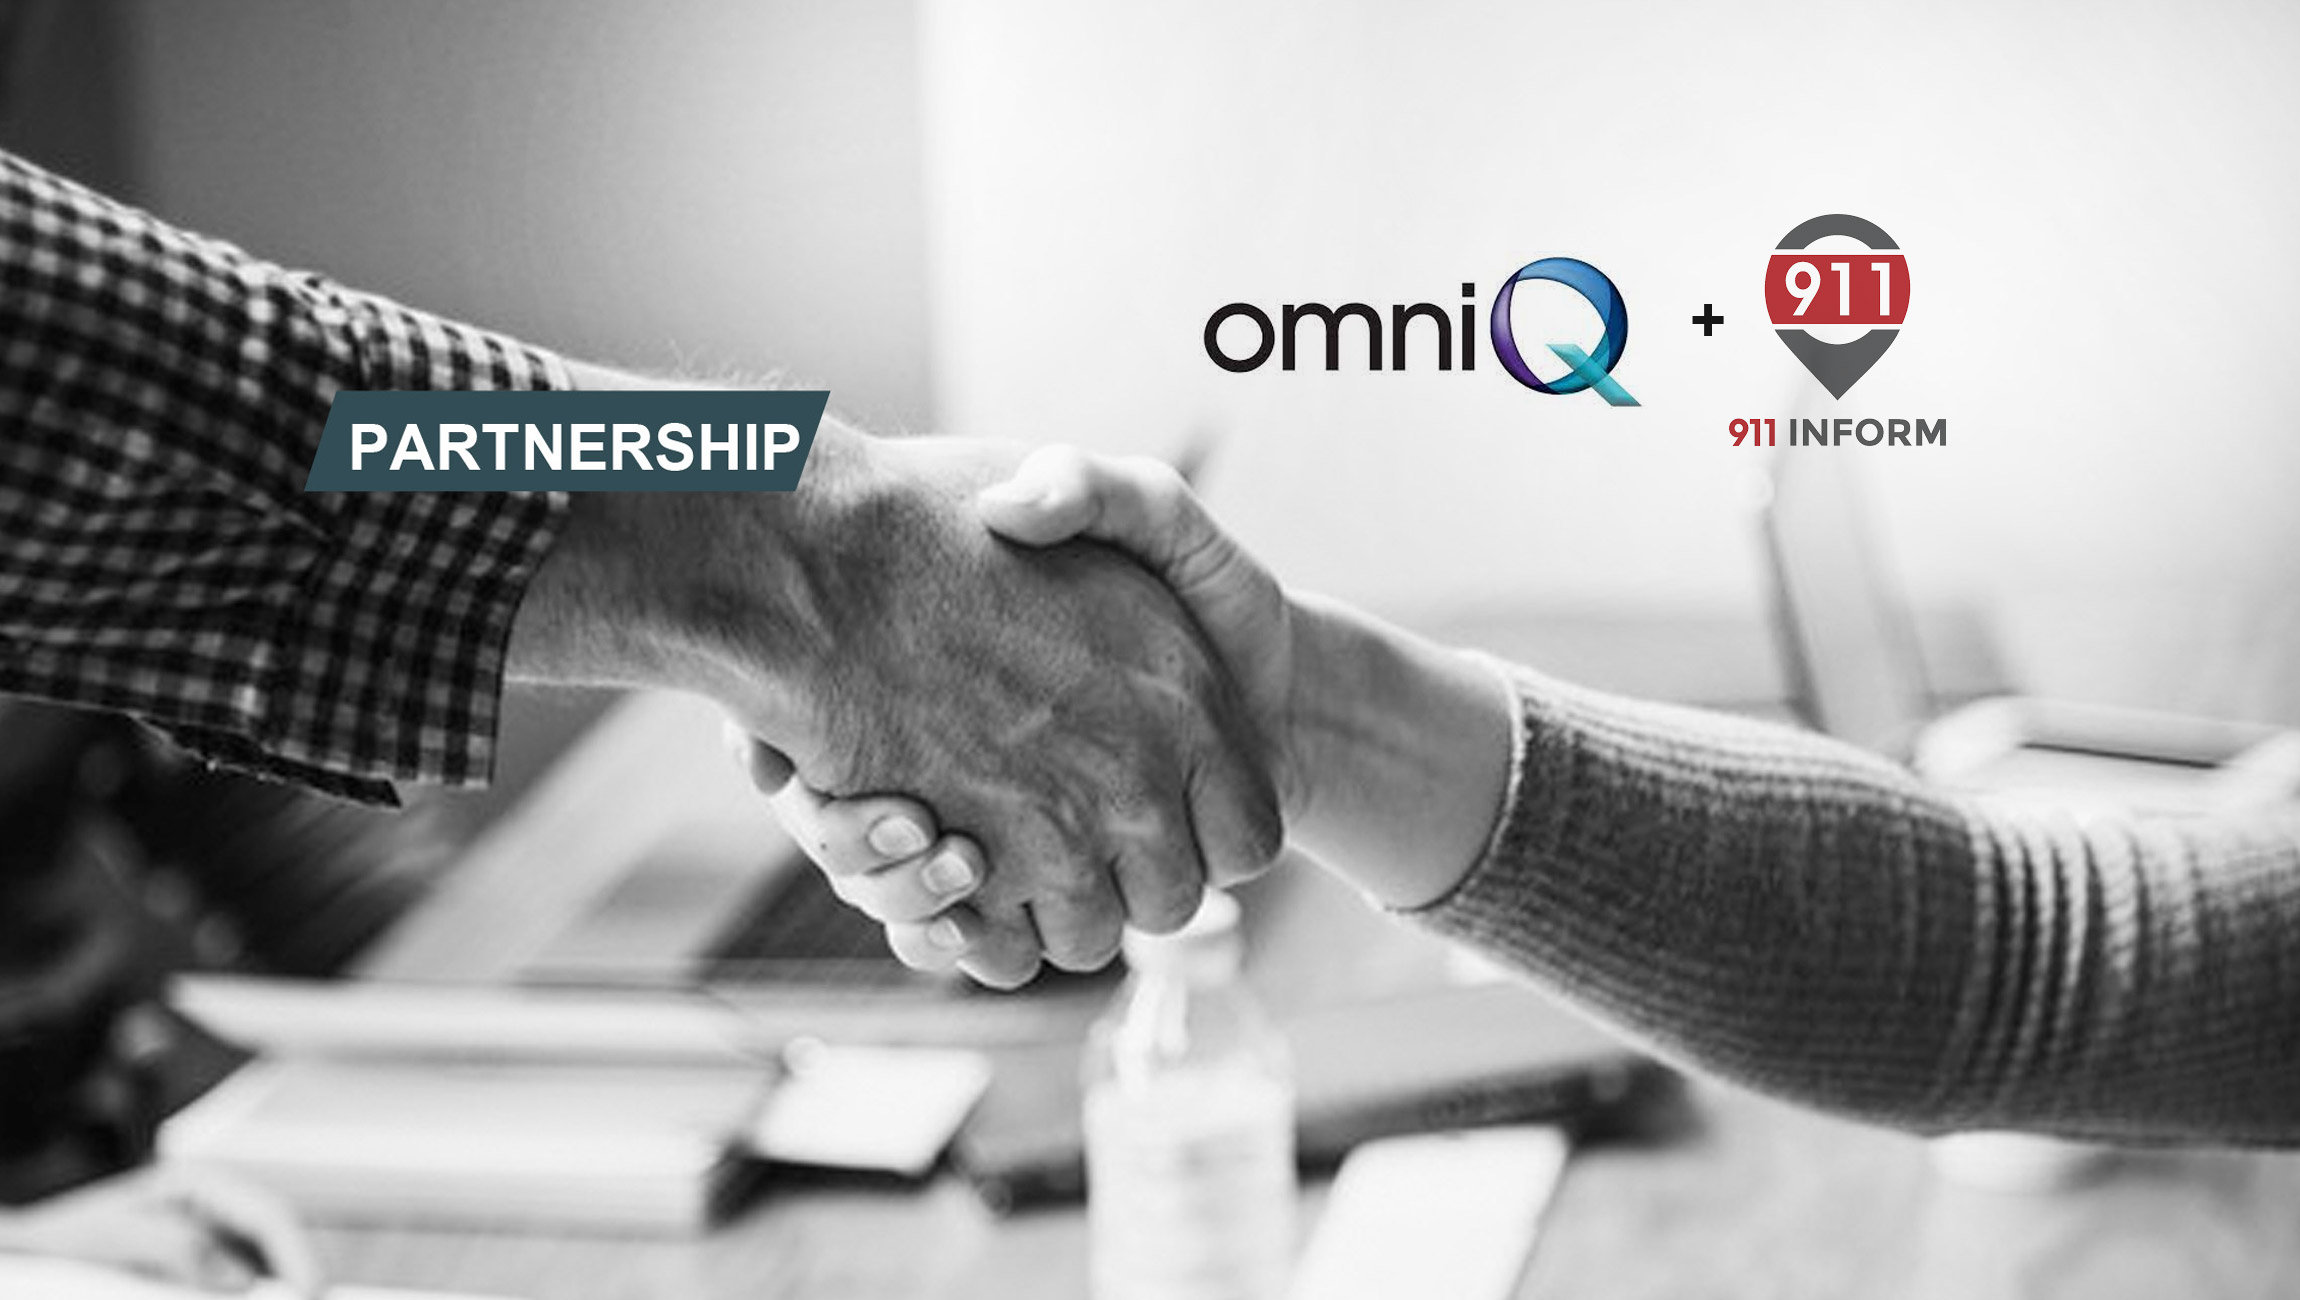 omniQ Partners with 911inform to Expand Offerings and Sales Channels for AI-Based Object Identification and Location Discovery Solutions